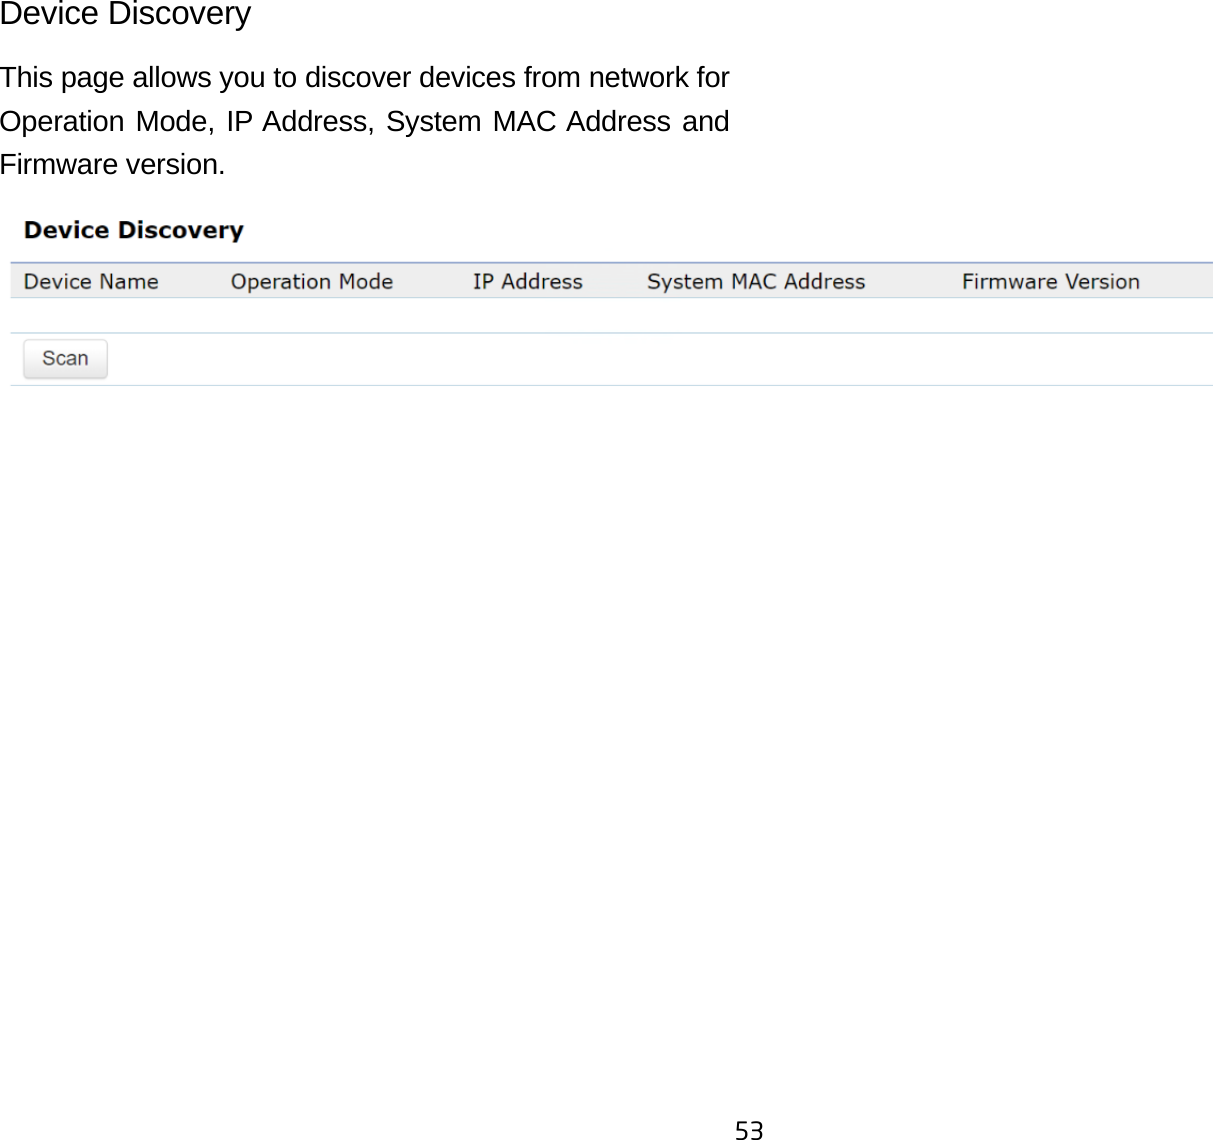 53Device Discovery This page allows you to discover devices from network for Operation Mode, IP Address, System MAC Address and Firmware version.